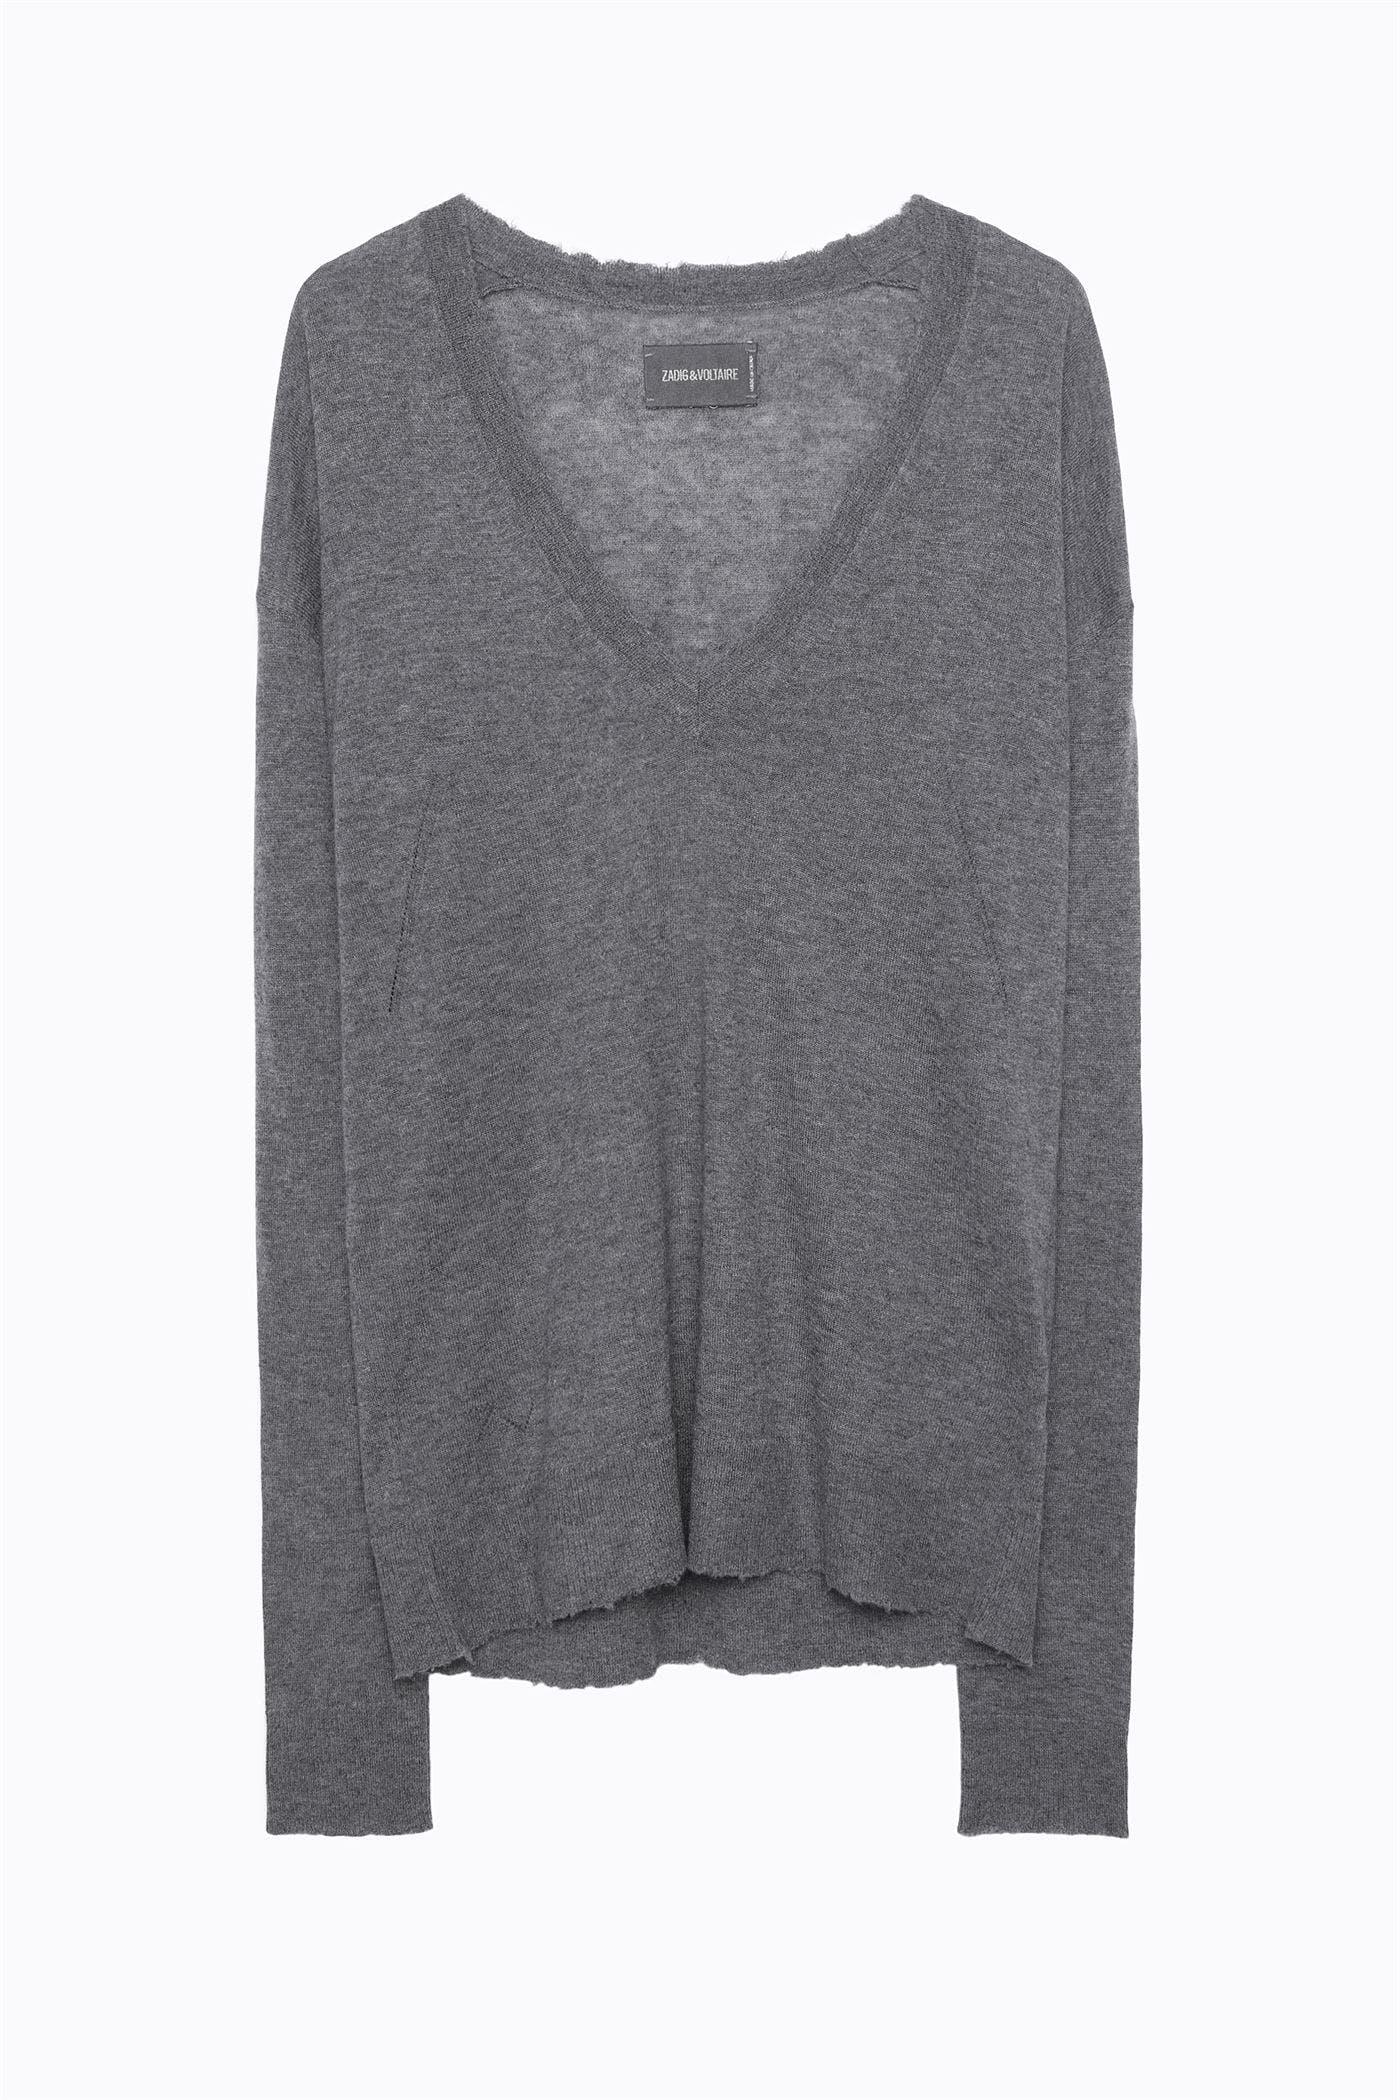 Zadig & Voltaire Happy Cp Cashmere Sweater in Grey (Gray) - Lyst